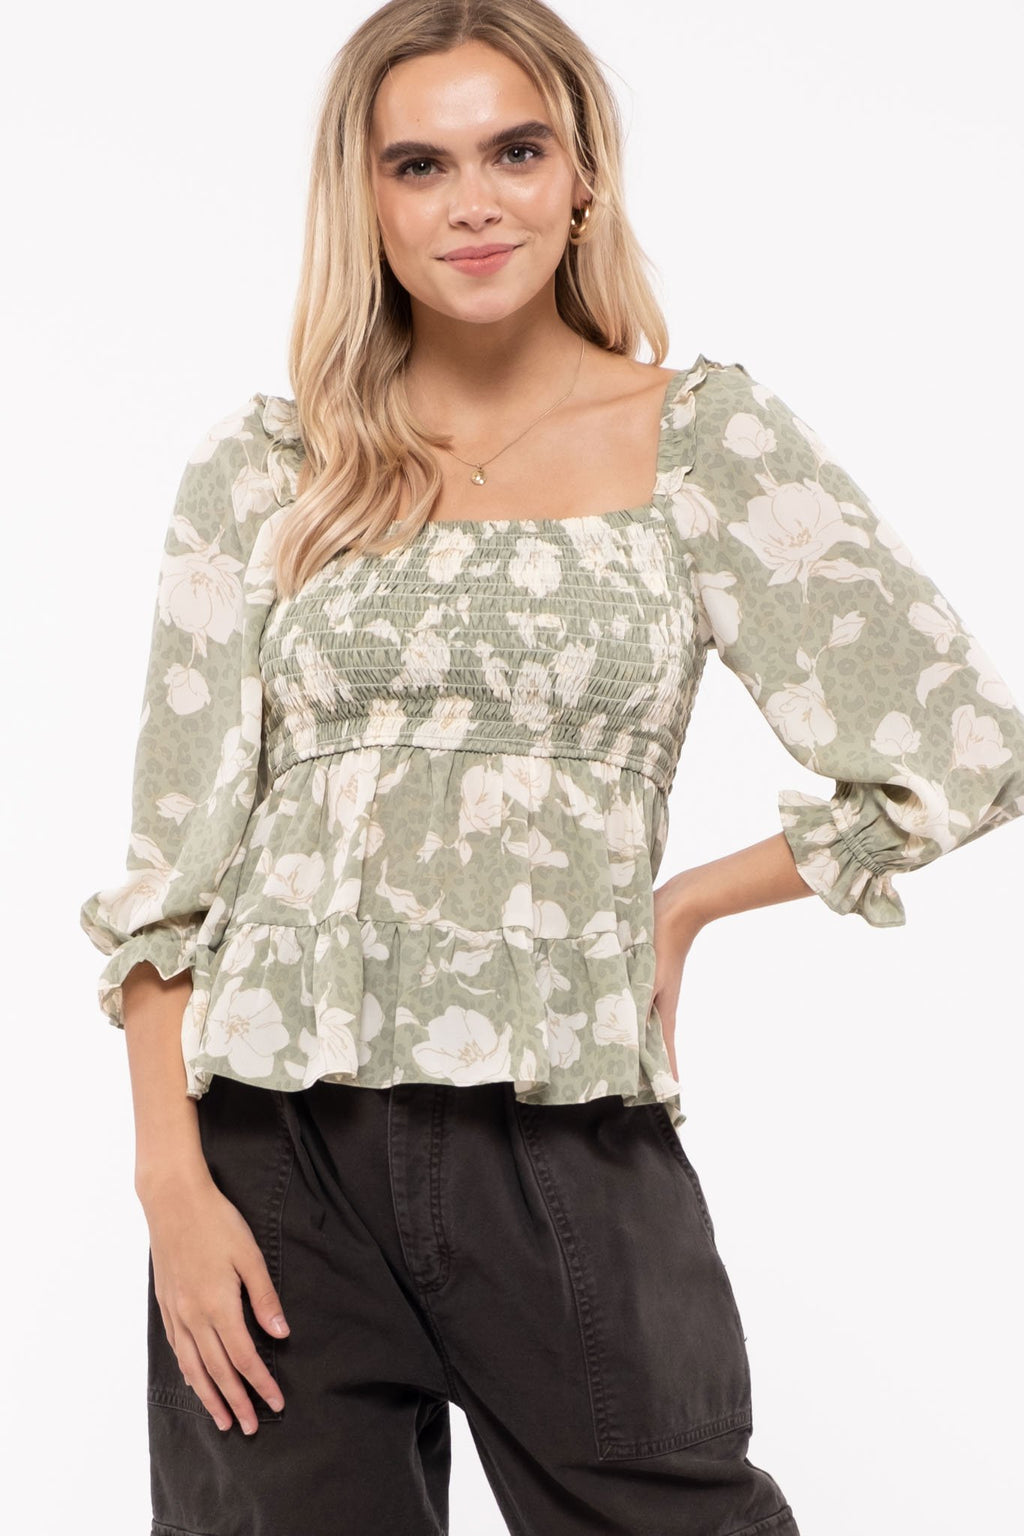 Square neckline top with baby doll fit  Ivy and Pearl Boutique Light Olive S 